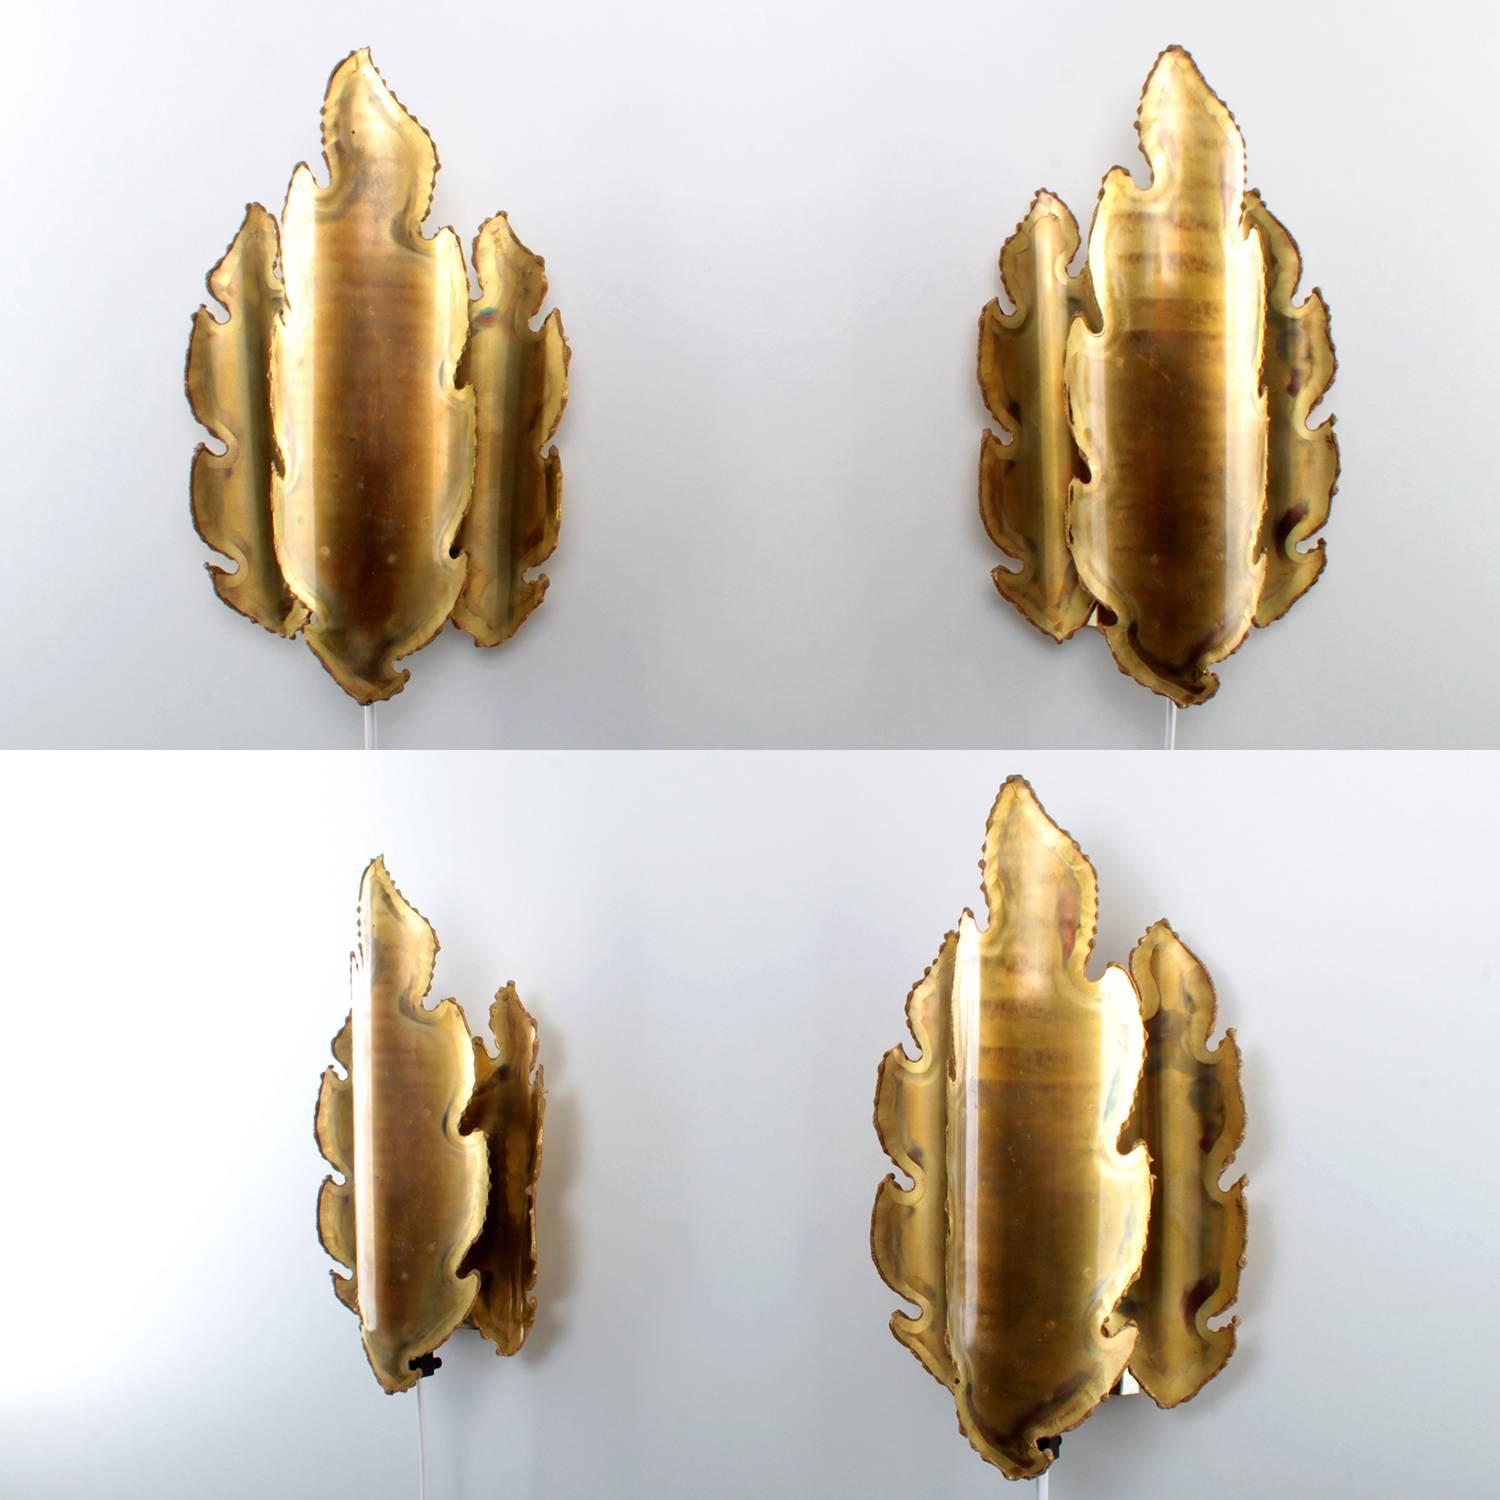 Danish Brass Sconces Pair, by Holm Sorensen, 1960s, Brutalist Style Brass Wall Lamps